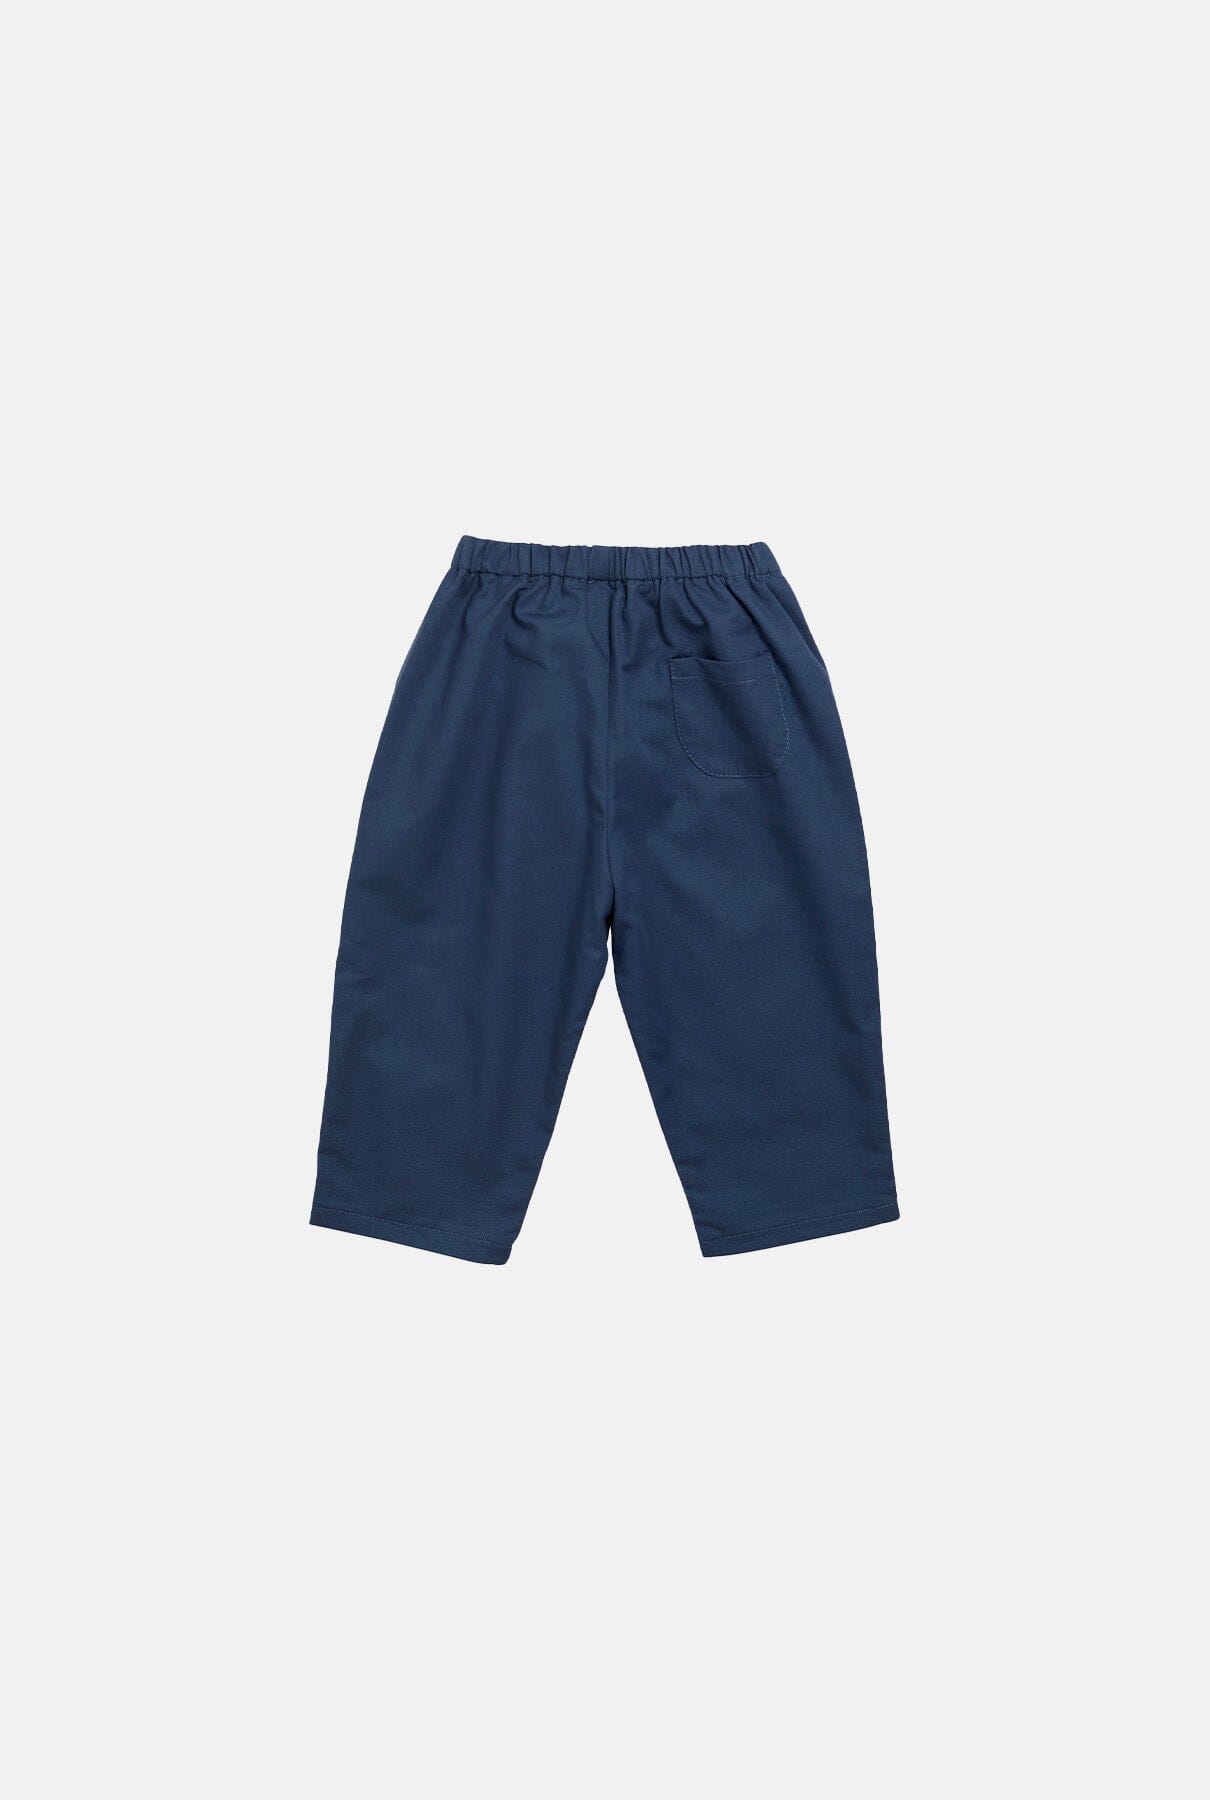 Tito Trousers Bright Blue Kids Clothing Amaia London 